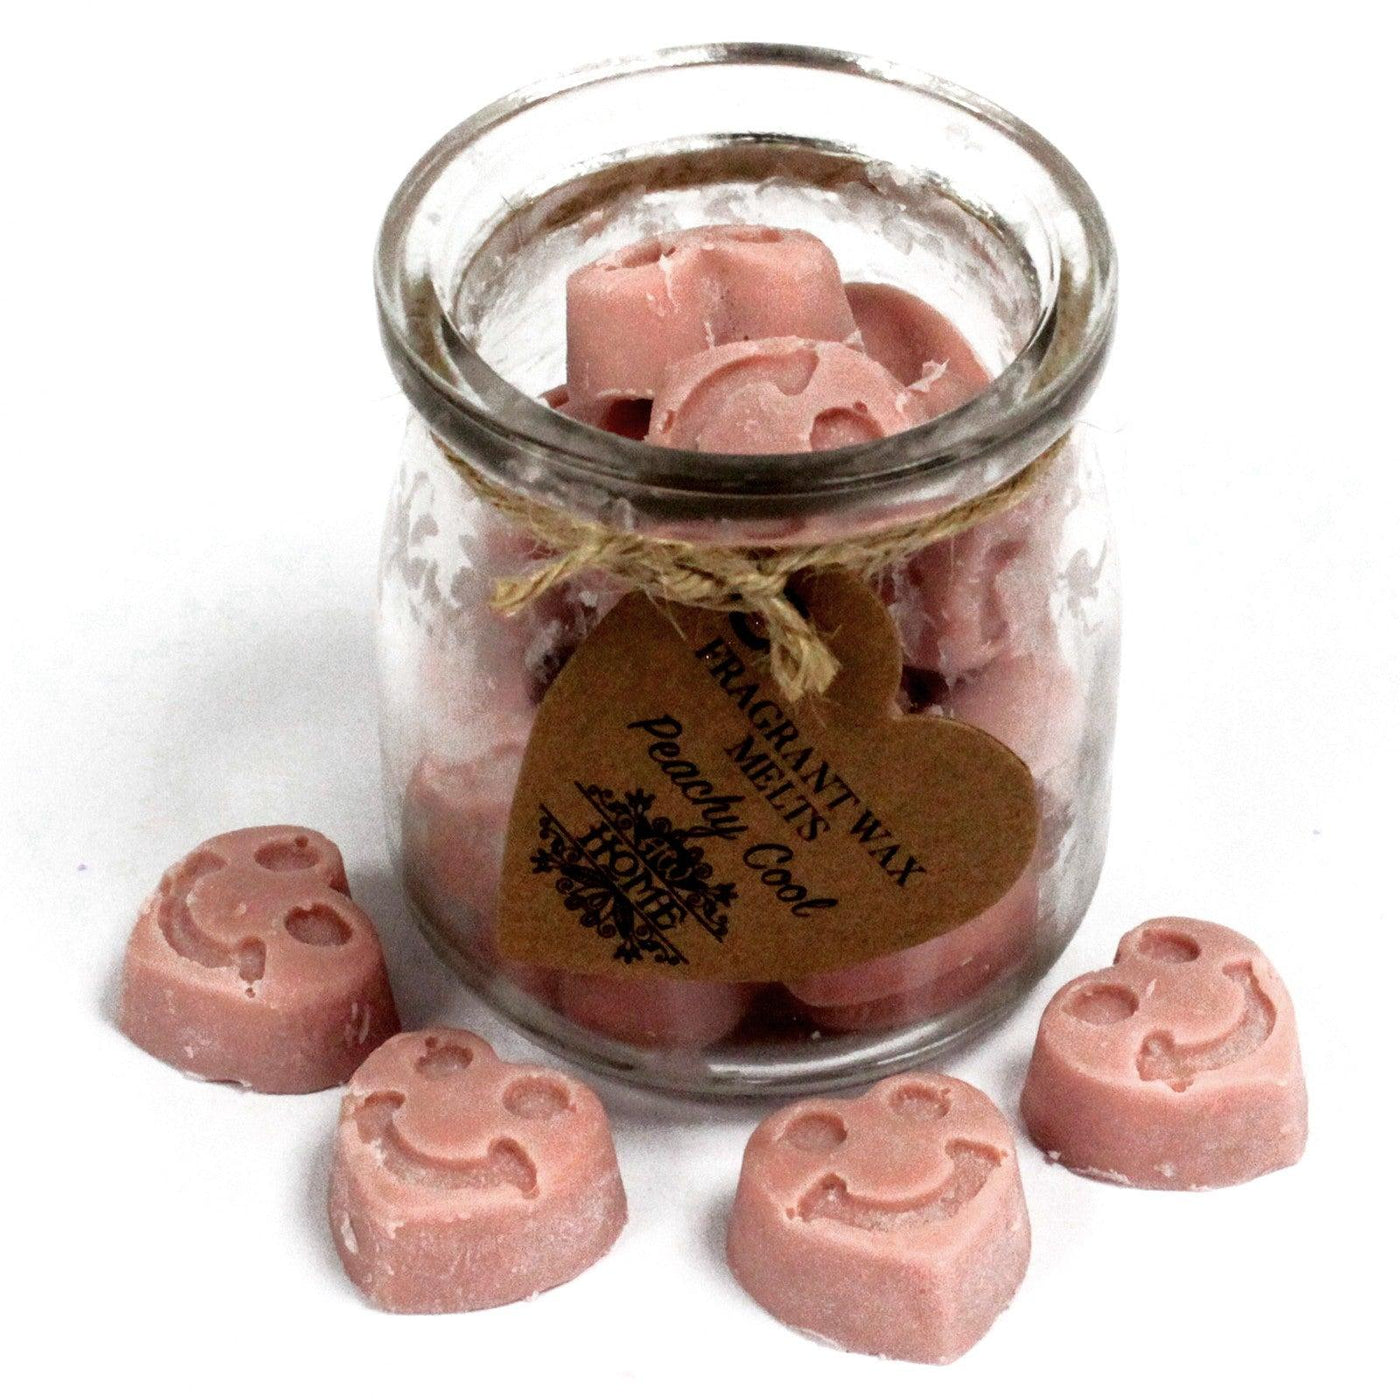 Natural Soy Fragrance Oil Heart Wax Melts - Peachy Cool